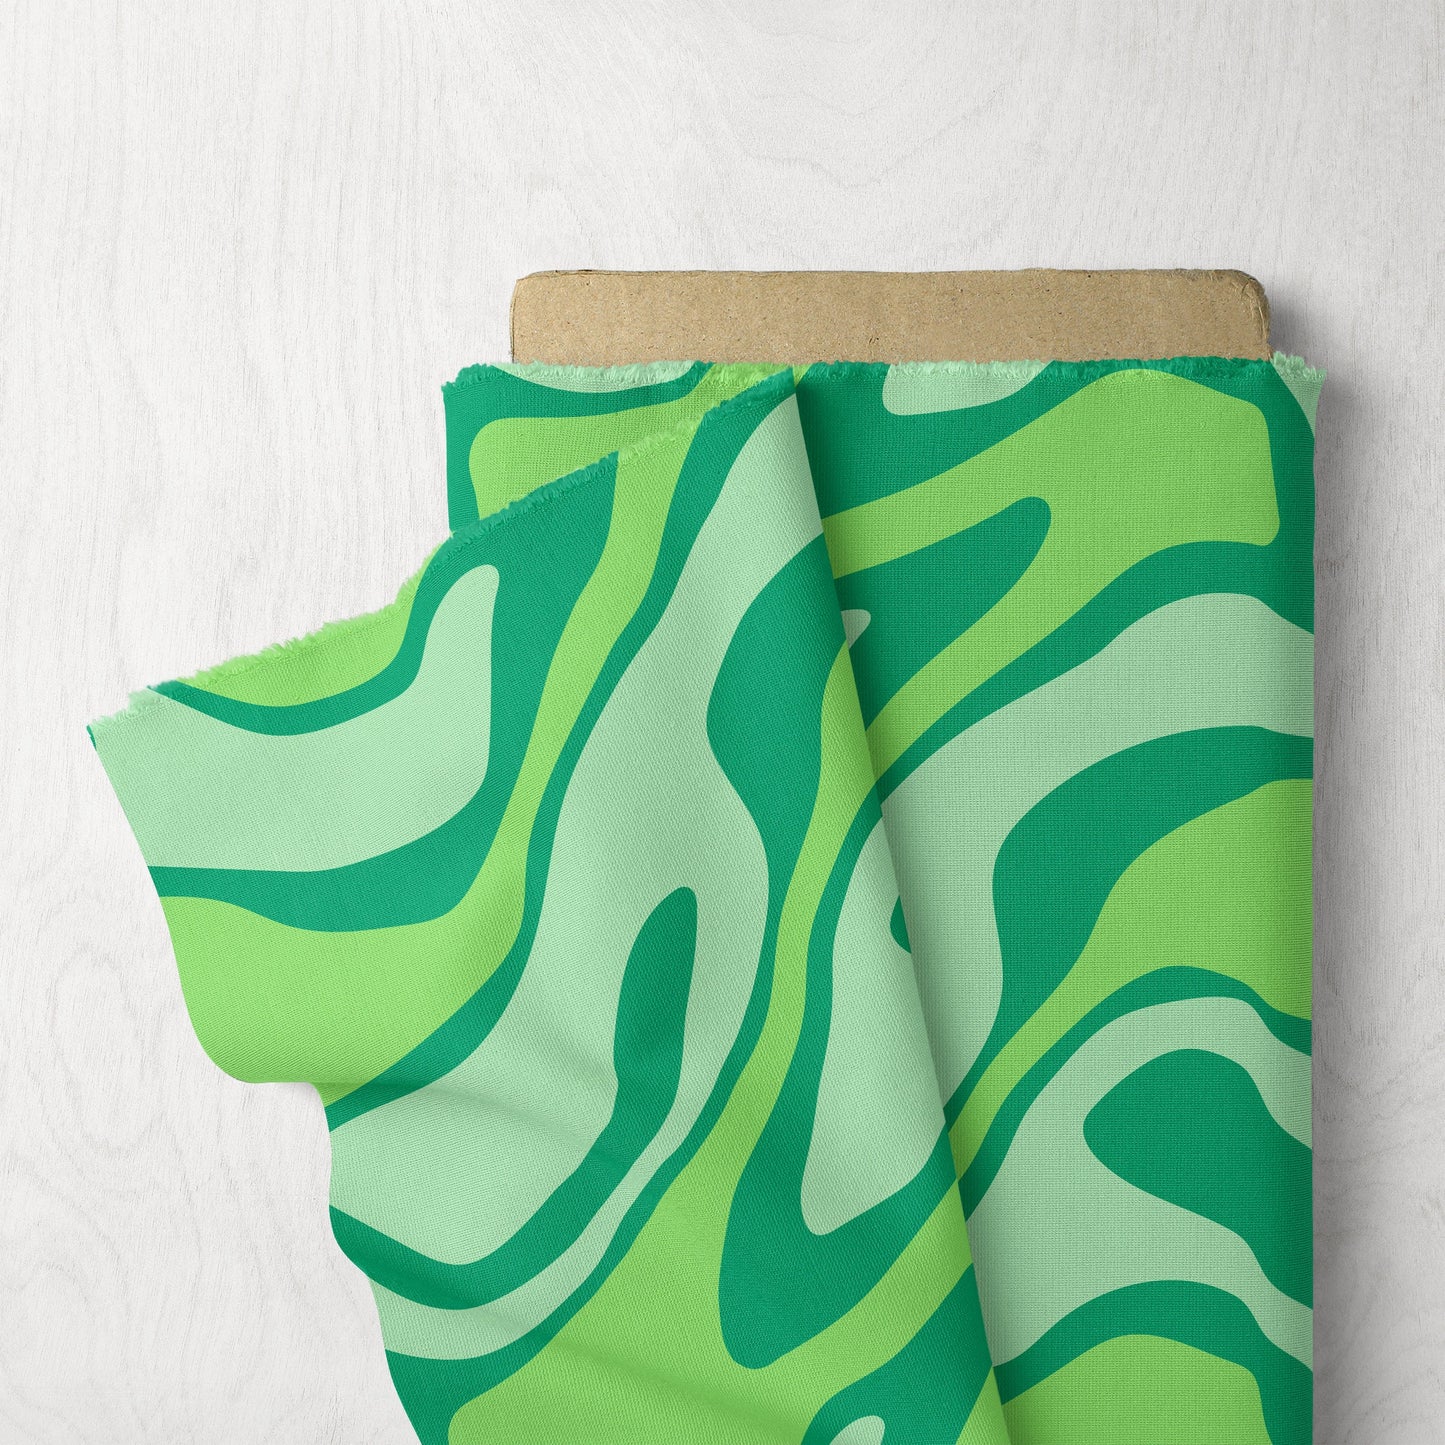 Retro Swirl Seamless Pattern Green Groovy Seamless File for Fabric Sublimation